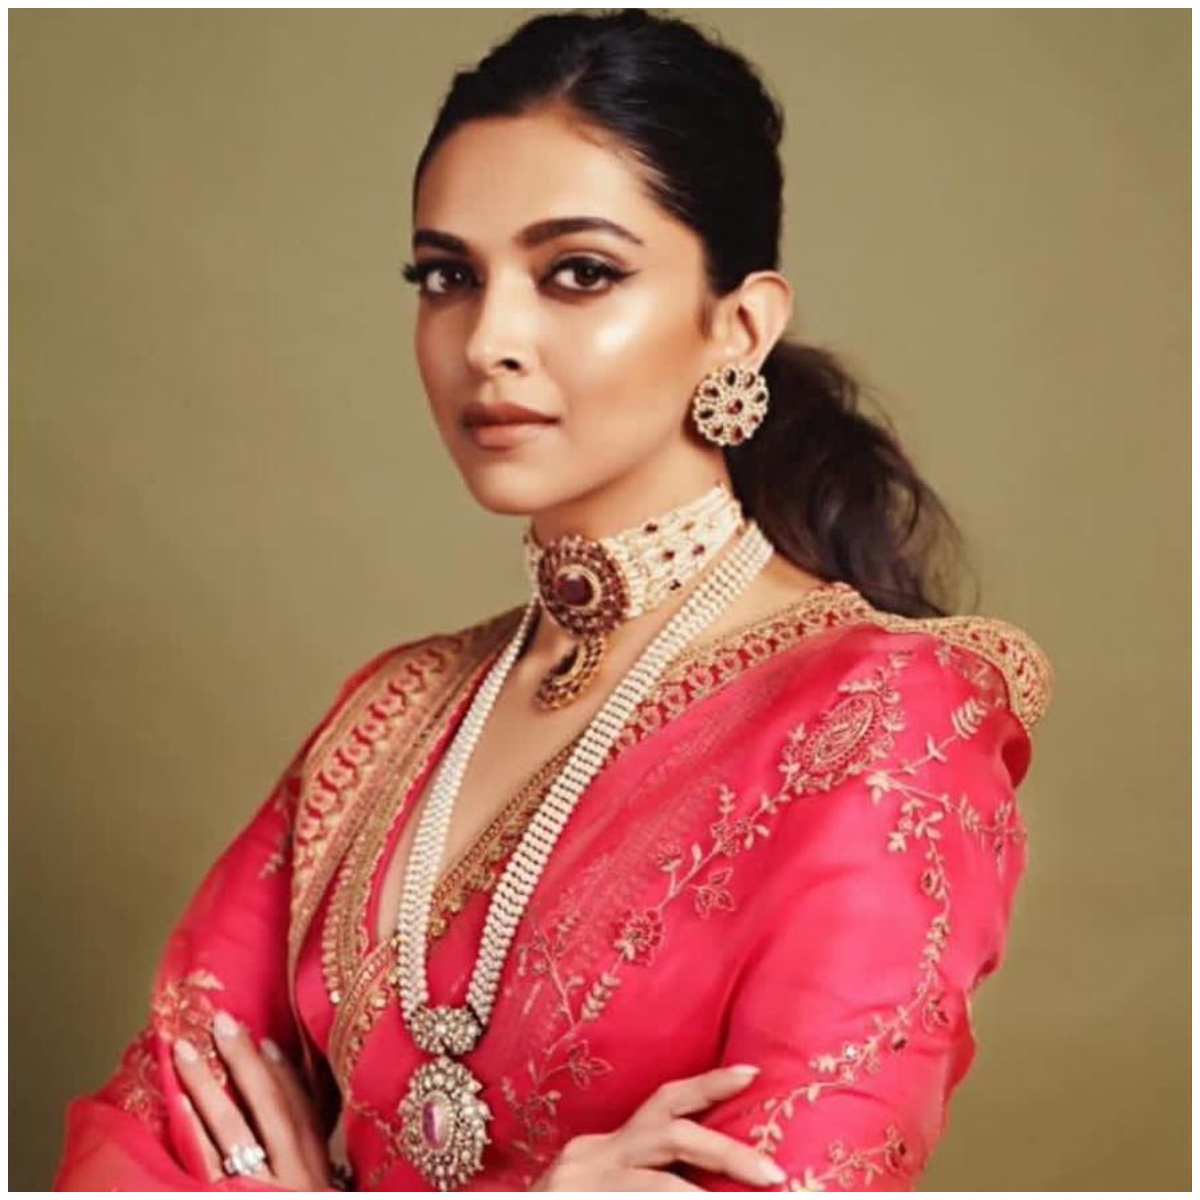 Deepika Padukone to Katrina Kaif: 6 Celeb approved statement necklaces you can wear this Karwa Chauth